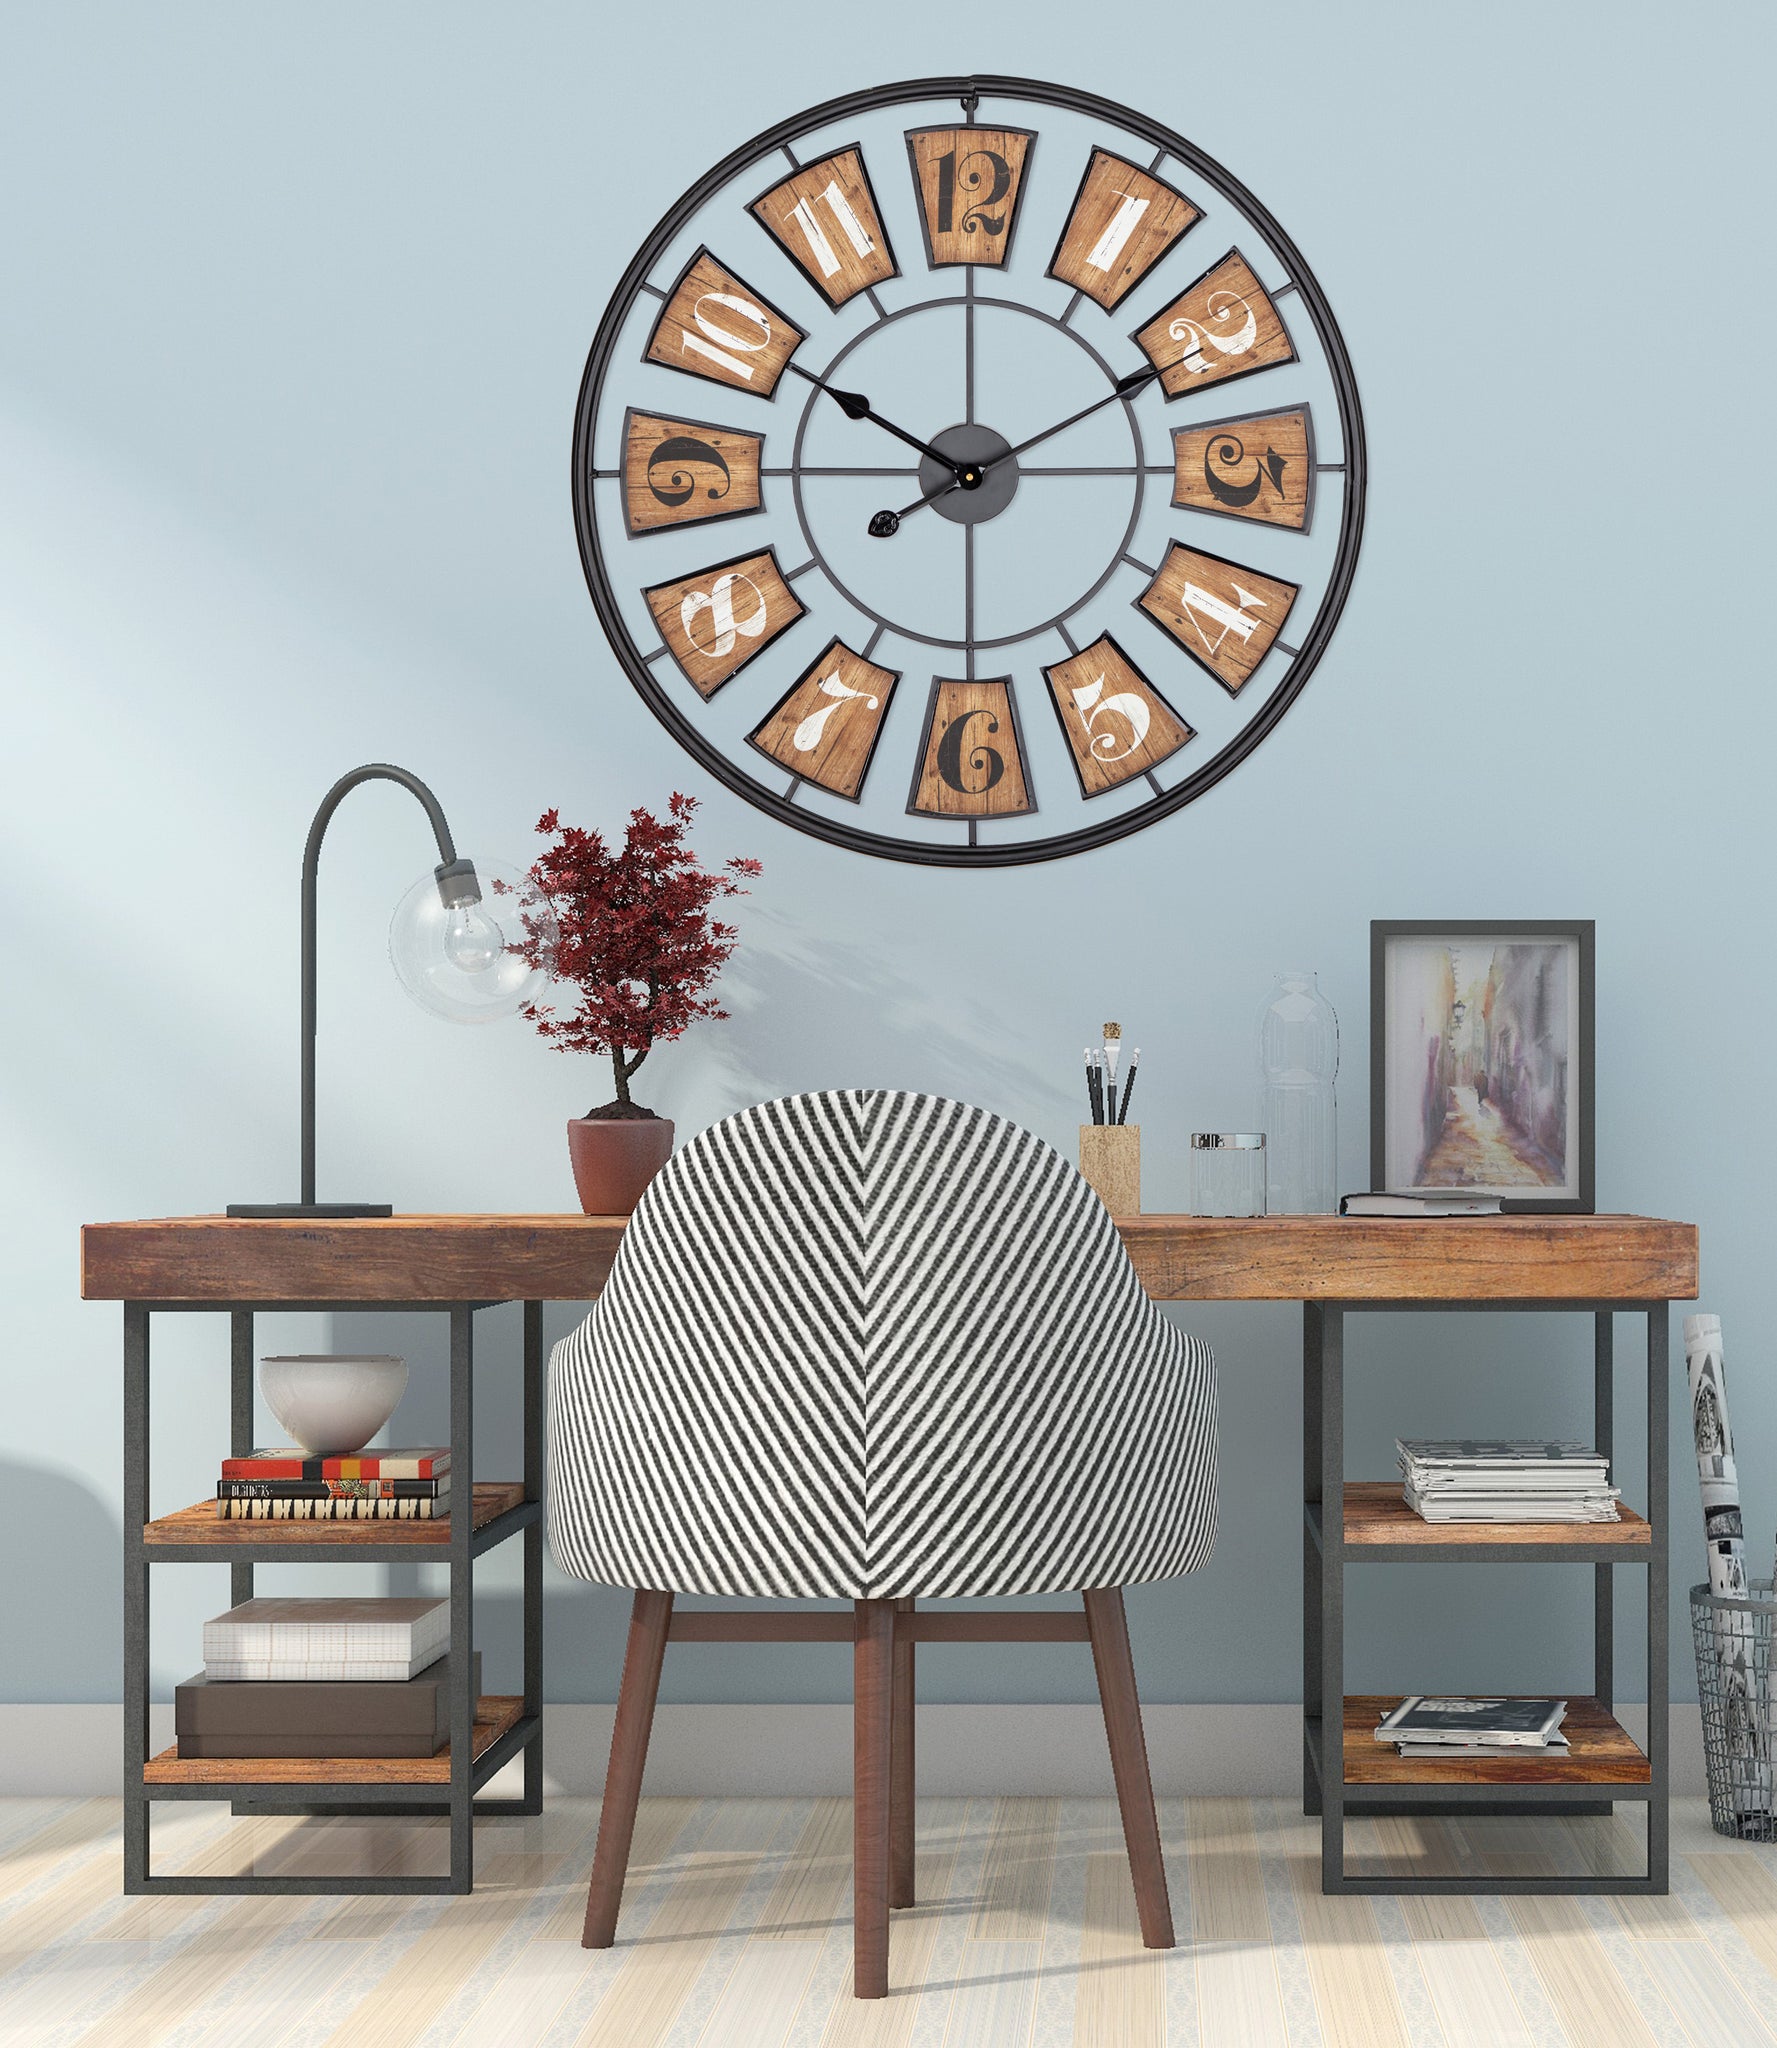 Loft97 CL45WD 27" Metal Wall Clockwith Black Frame and Wood Colored Panels